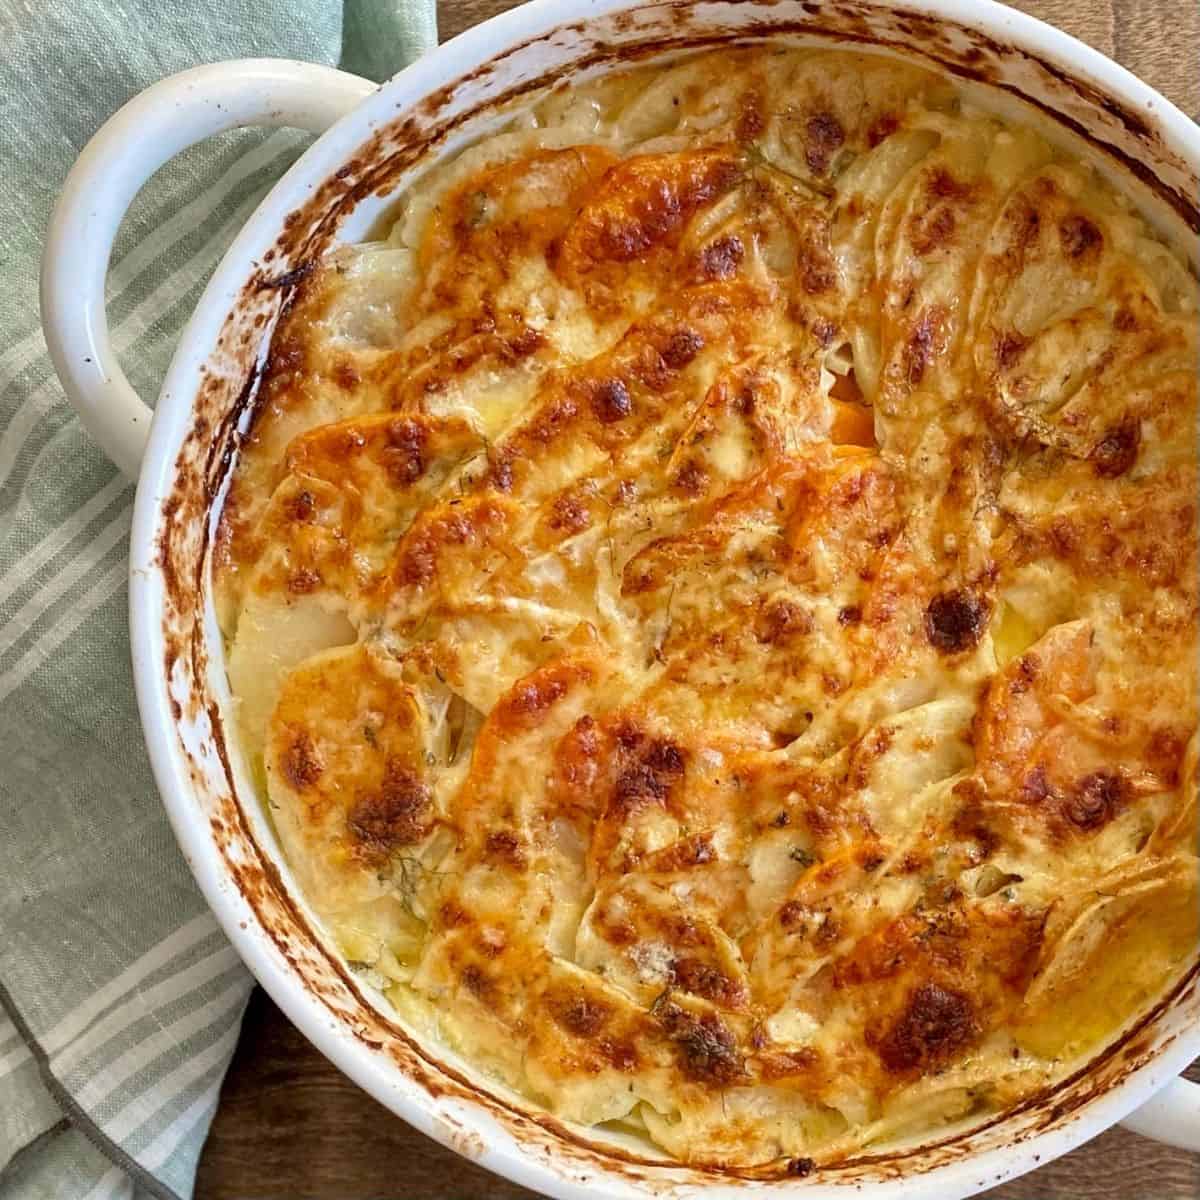 baked fennel and sweet potato gratin in round casserole next to green napkin